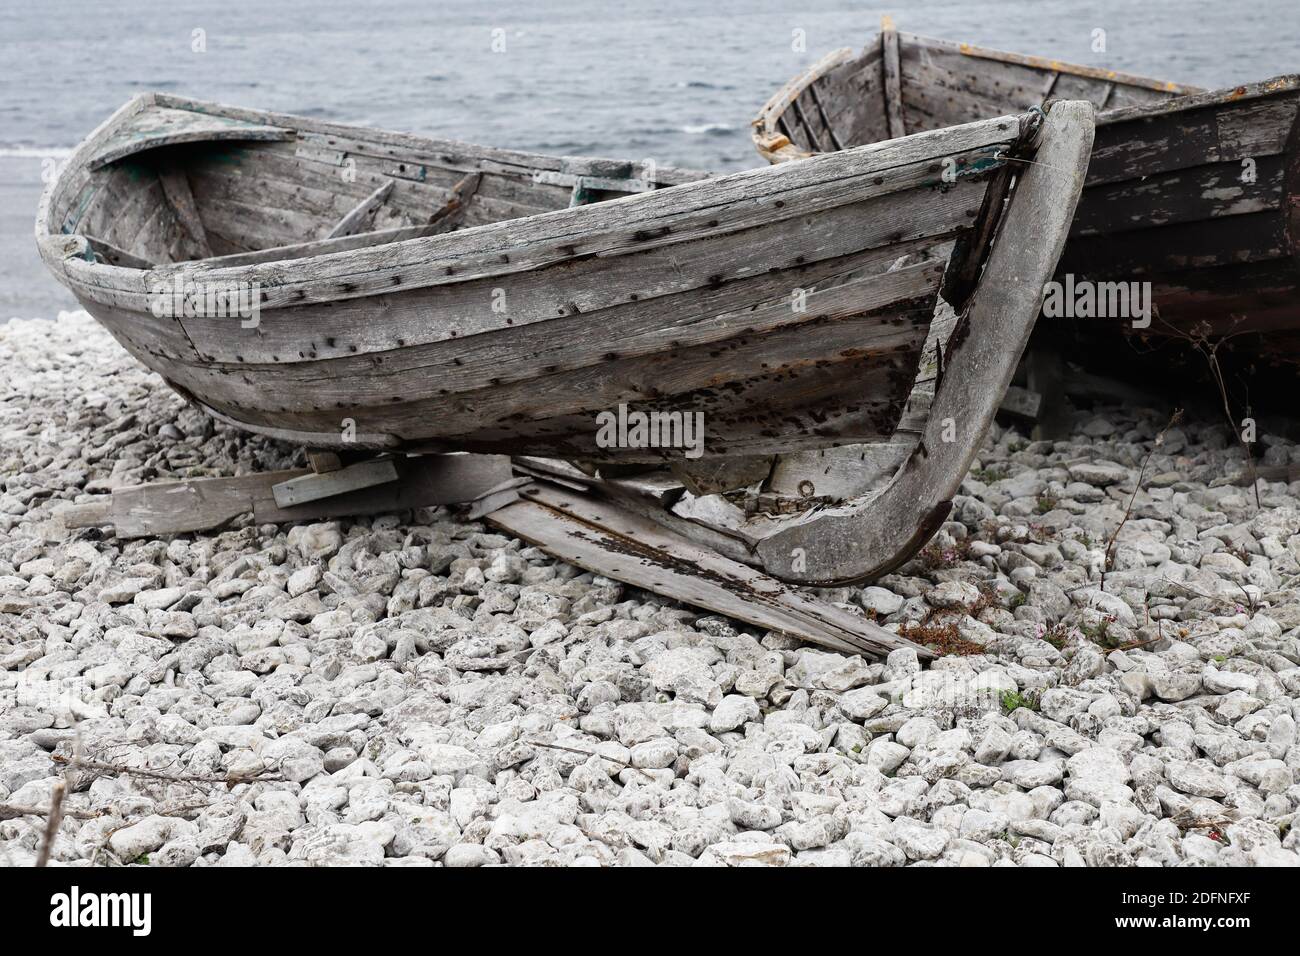 https://c8.alamy.com/comp/2DFNFXF/old-wooden-small-open-fishing-boats-at-the-helgumannen-fishing-station-2DFNFXF.jpg